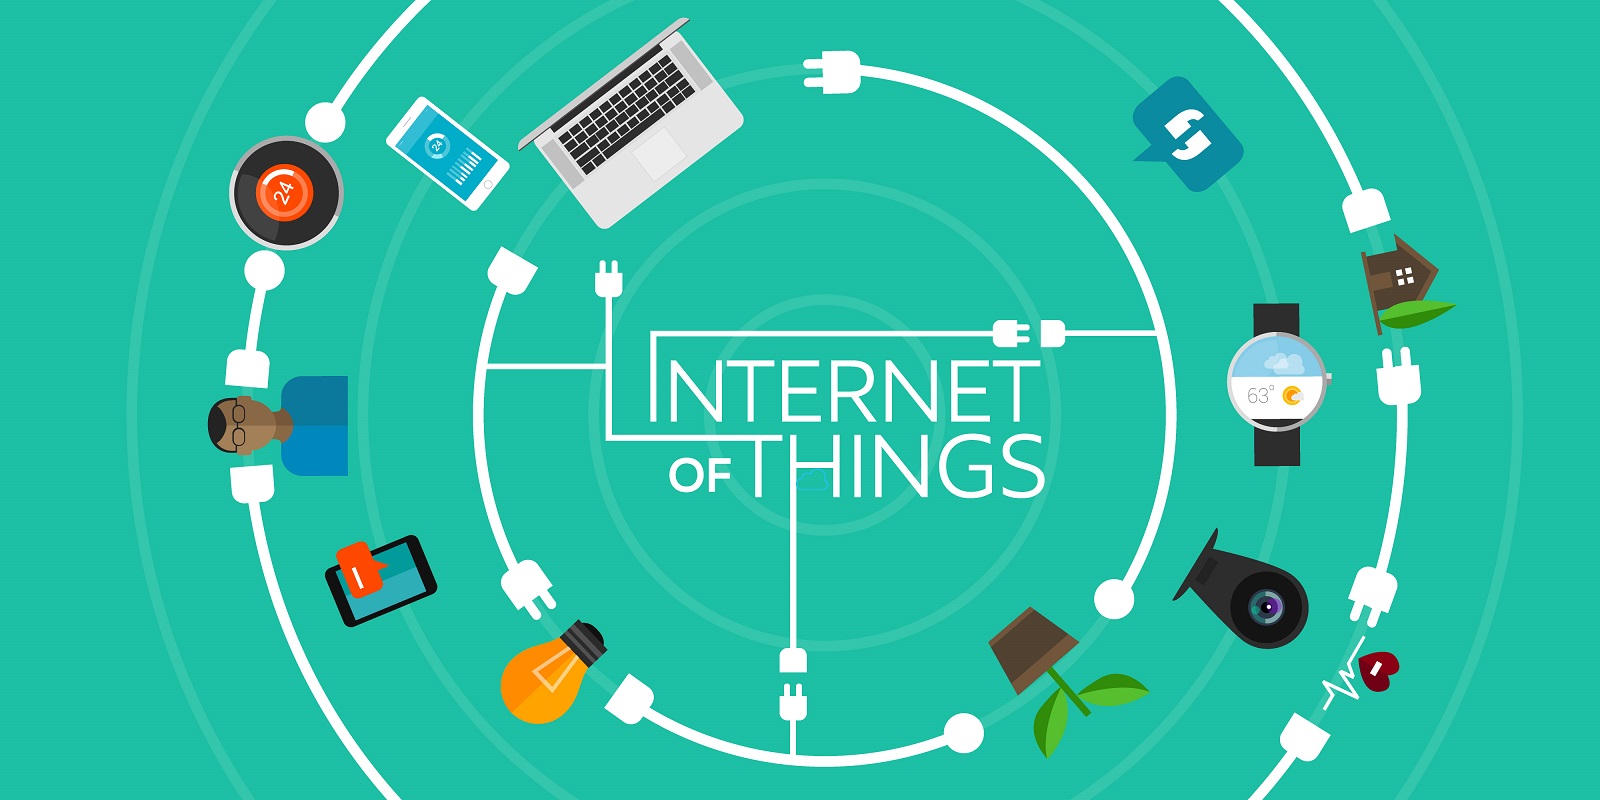 How Will Marketing Improve with the Internet of Things